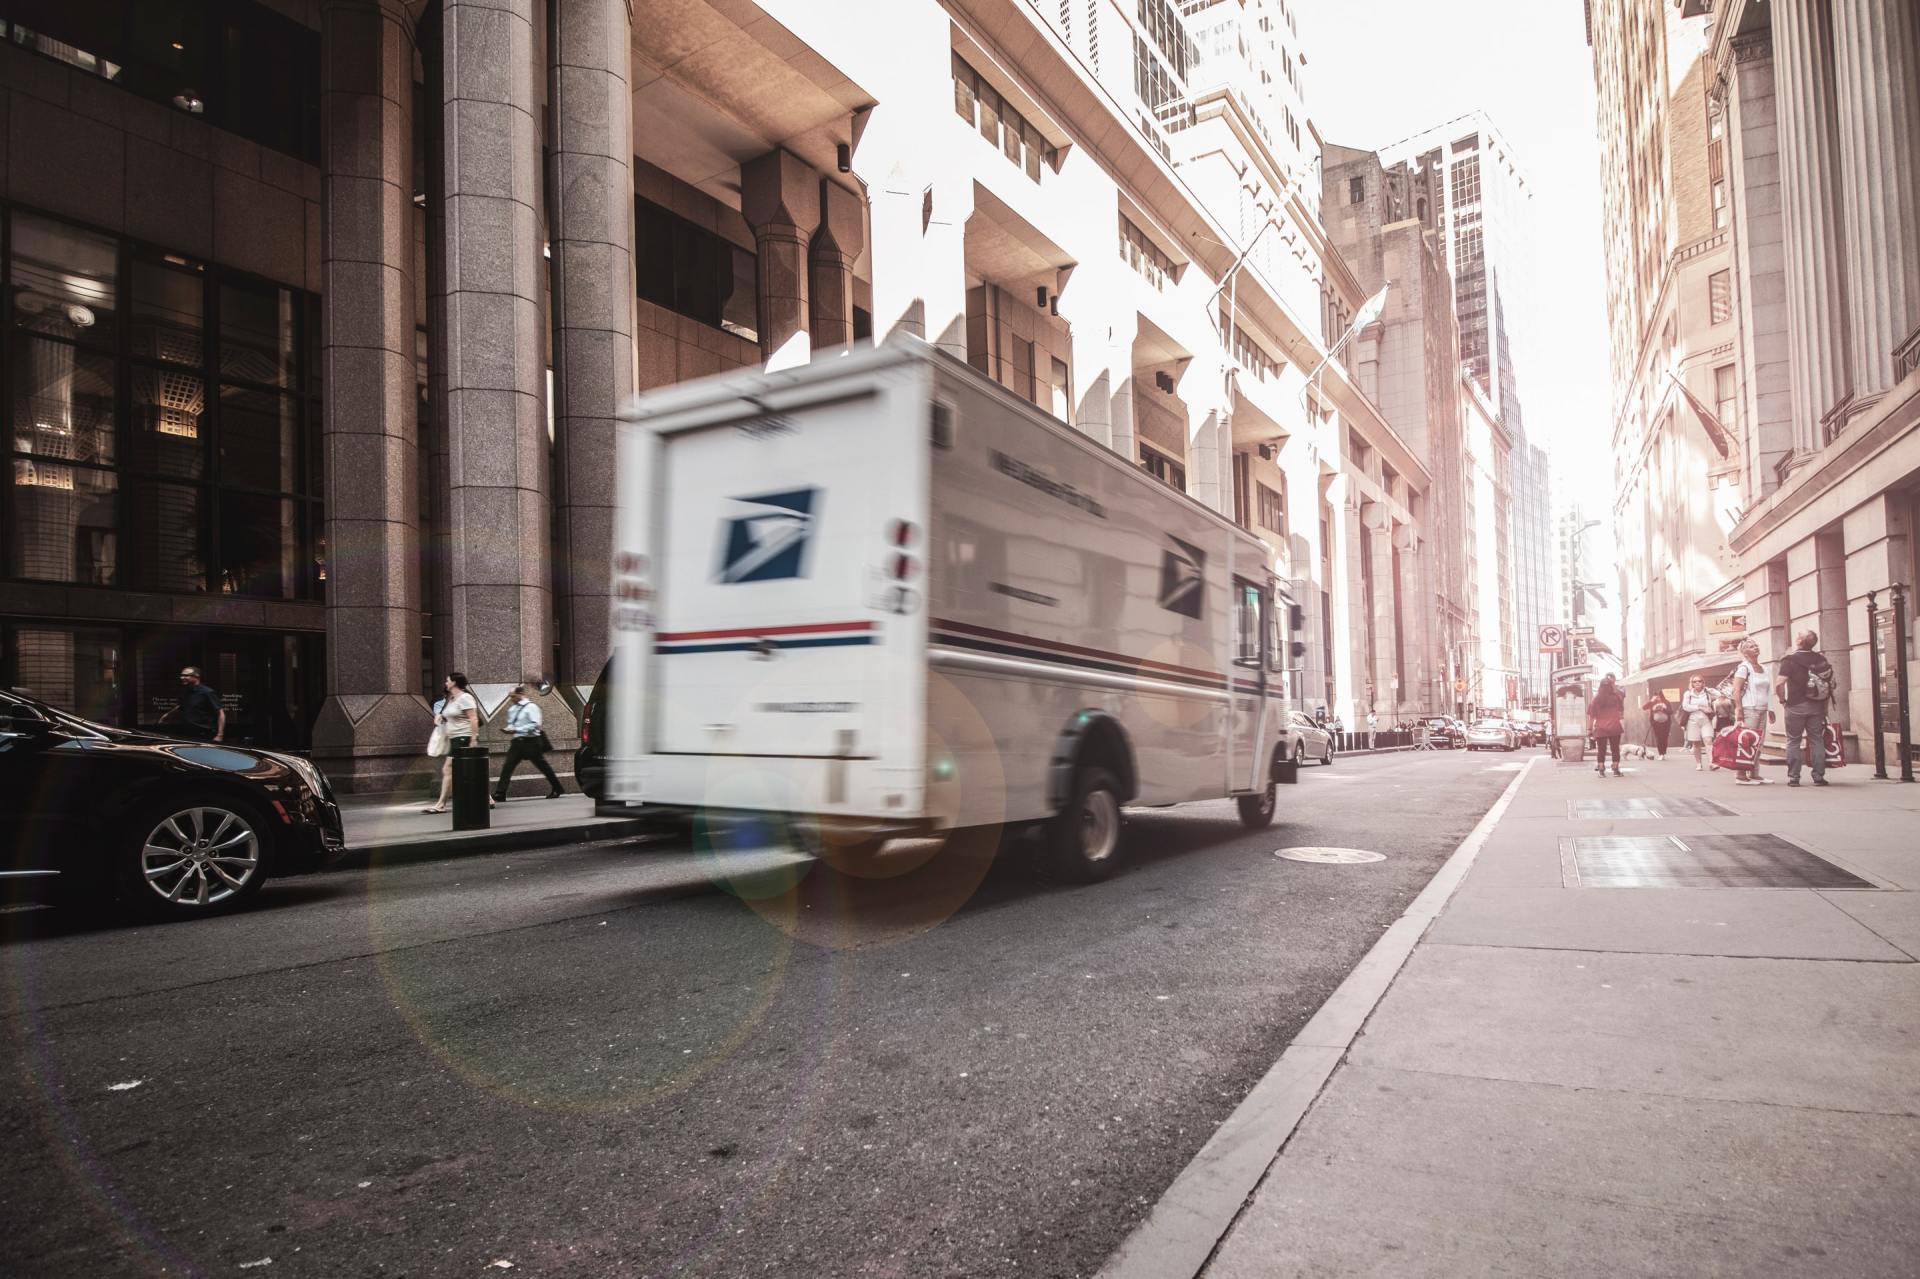 A mail truck is driving down a city street.